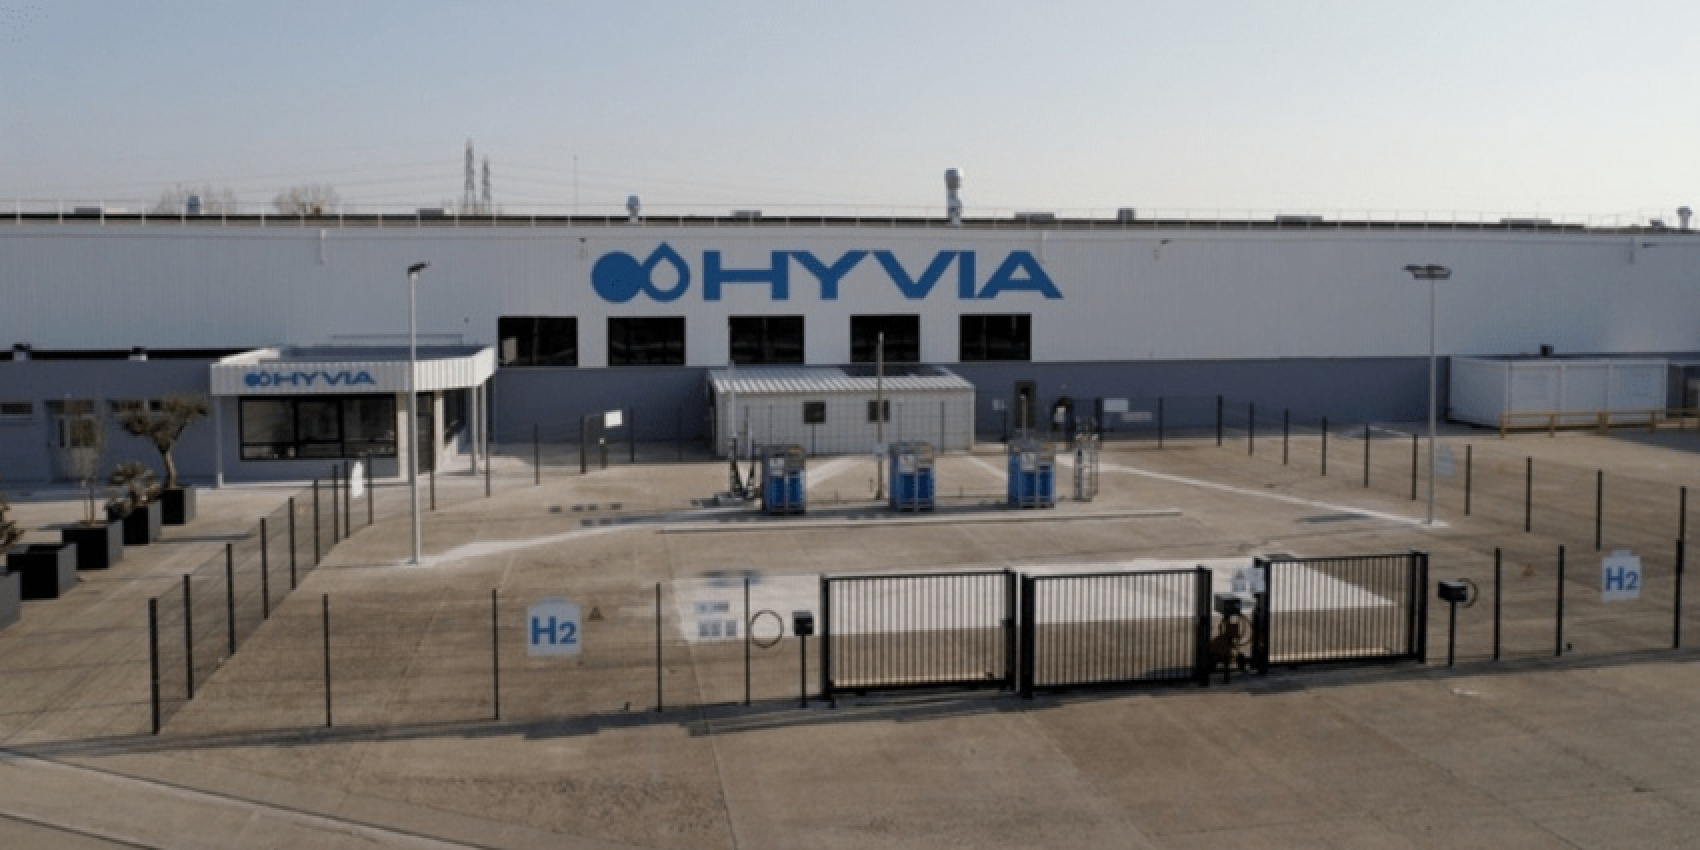 autos, battery & fuel cell, cars, electric vehicle, fcev, flins, france, fuel cell, hydrogen, hyvia, joint venture, plug power, renault, vnex, hyvia opens fuel cell plant in france